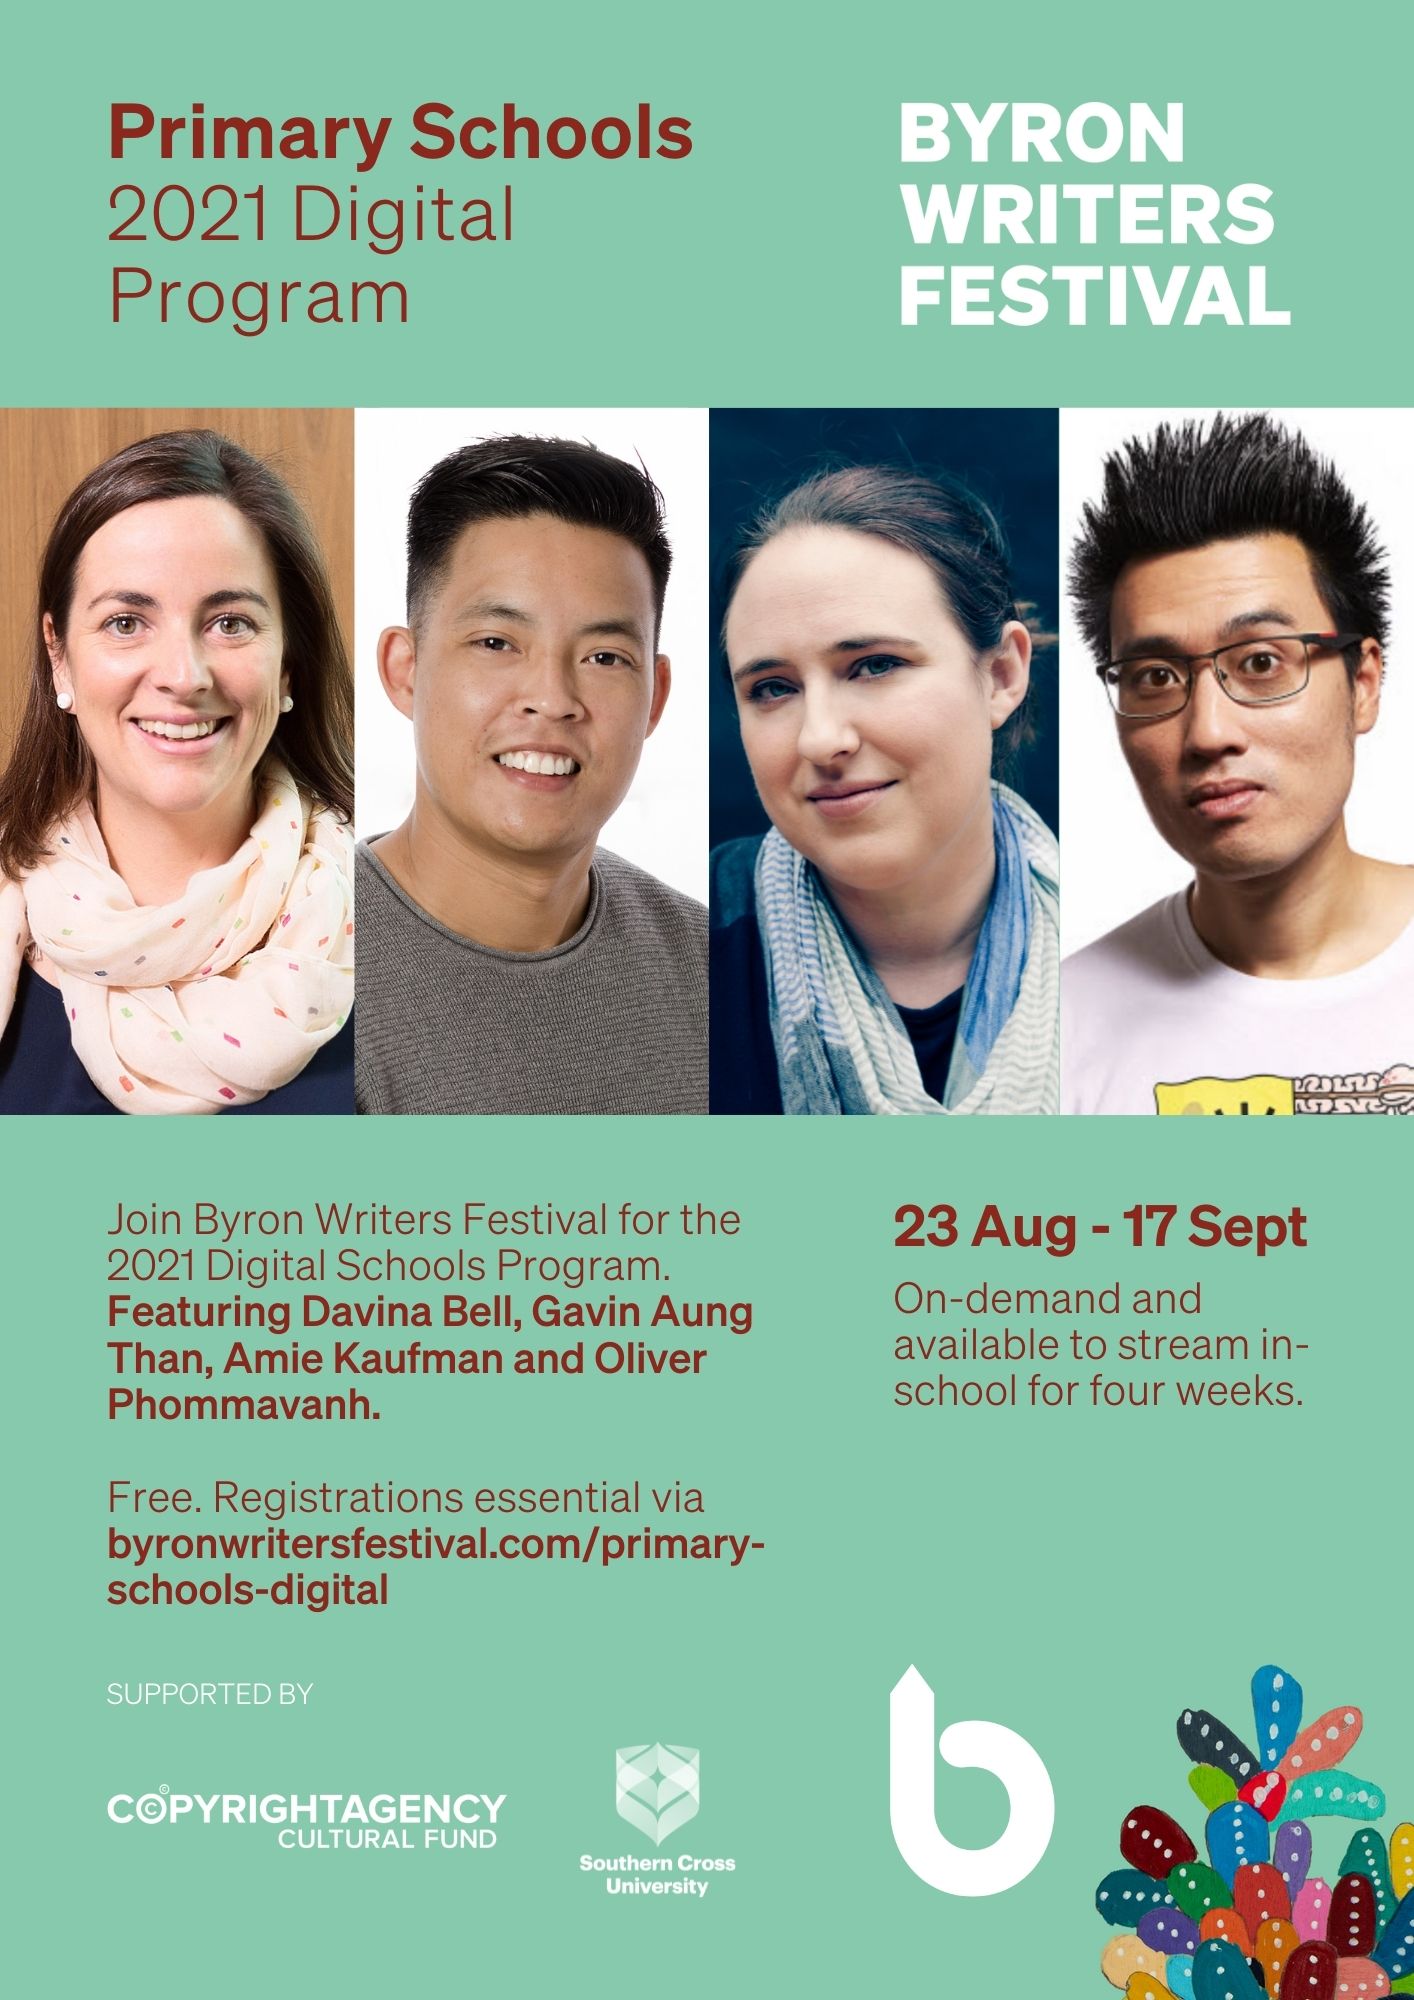 https://byronwritersfestival.com/wp-content/uploads/2021/07/Primary-Schools-Digital-2021-A4-Poster.jpg